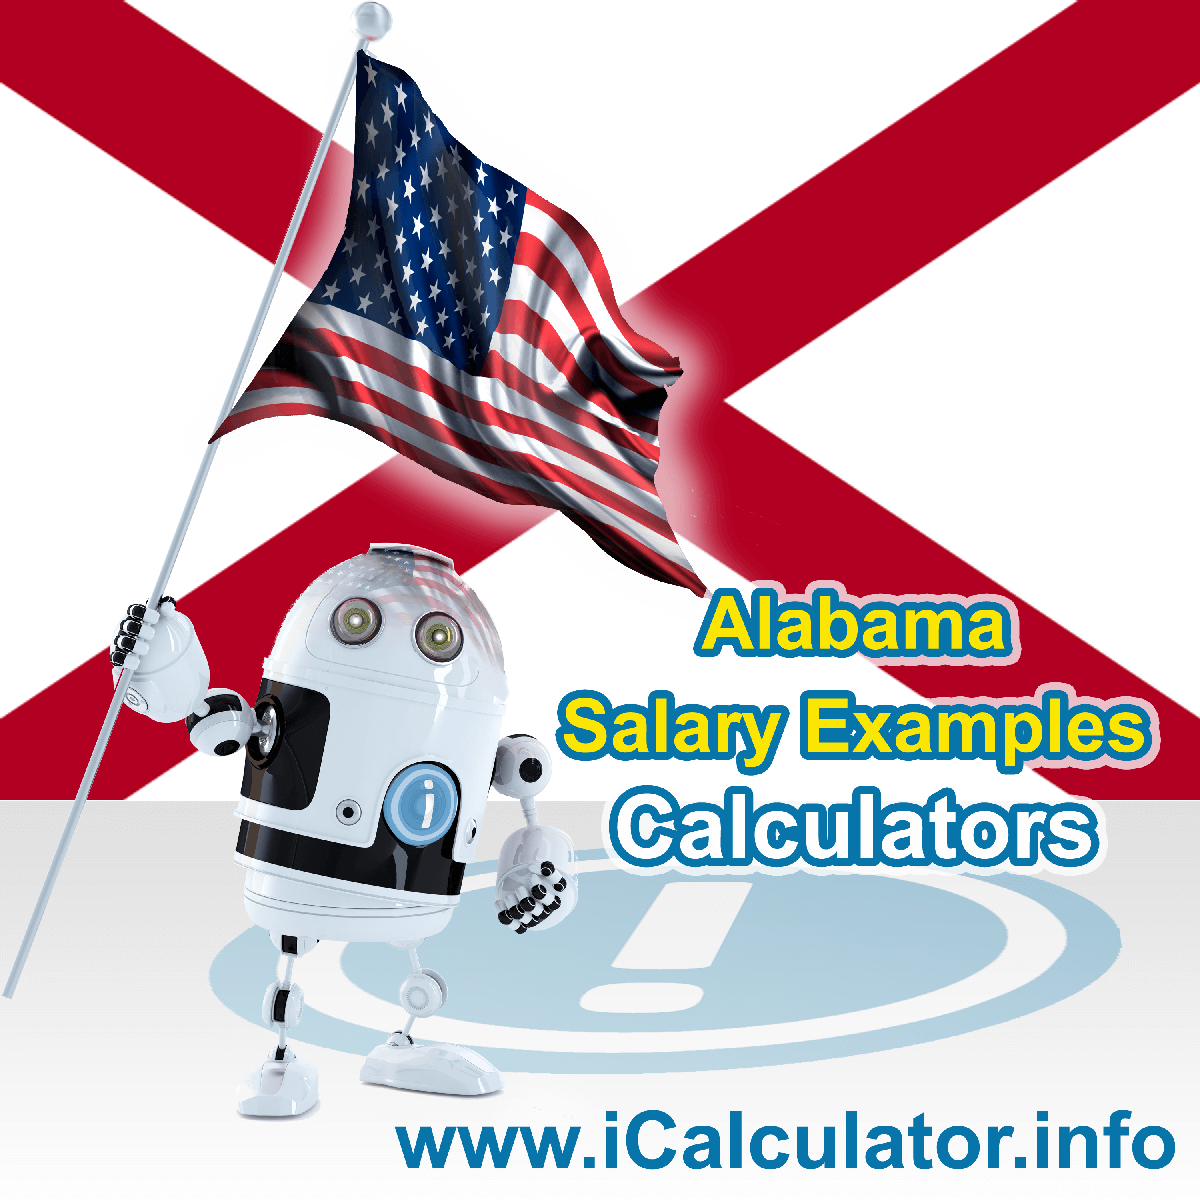 Alabama Salary Example for $ 50,000.00 in 2023 | iCalculator™ | $ 50,000.00 salary example for employee and employer paying Alabama State tincome taxes. Detailed salary after tax calculation including Alabama State Tax, Federal State Tax, Medicare Deductions, Social Security, Capital Gains and other income tax and salary deductions complete with supporting Alabama state tax tables 